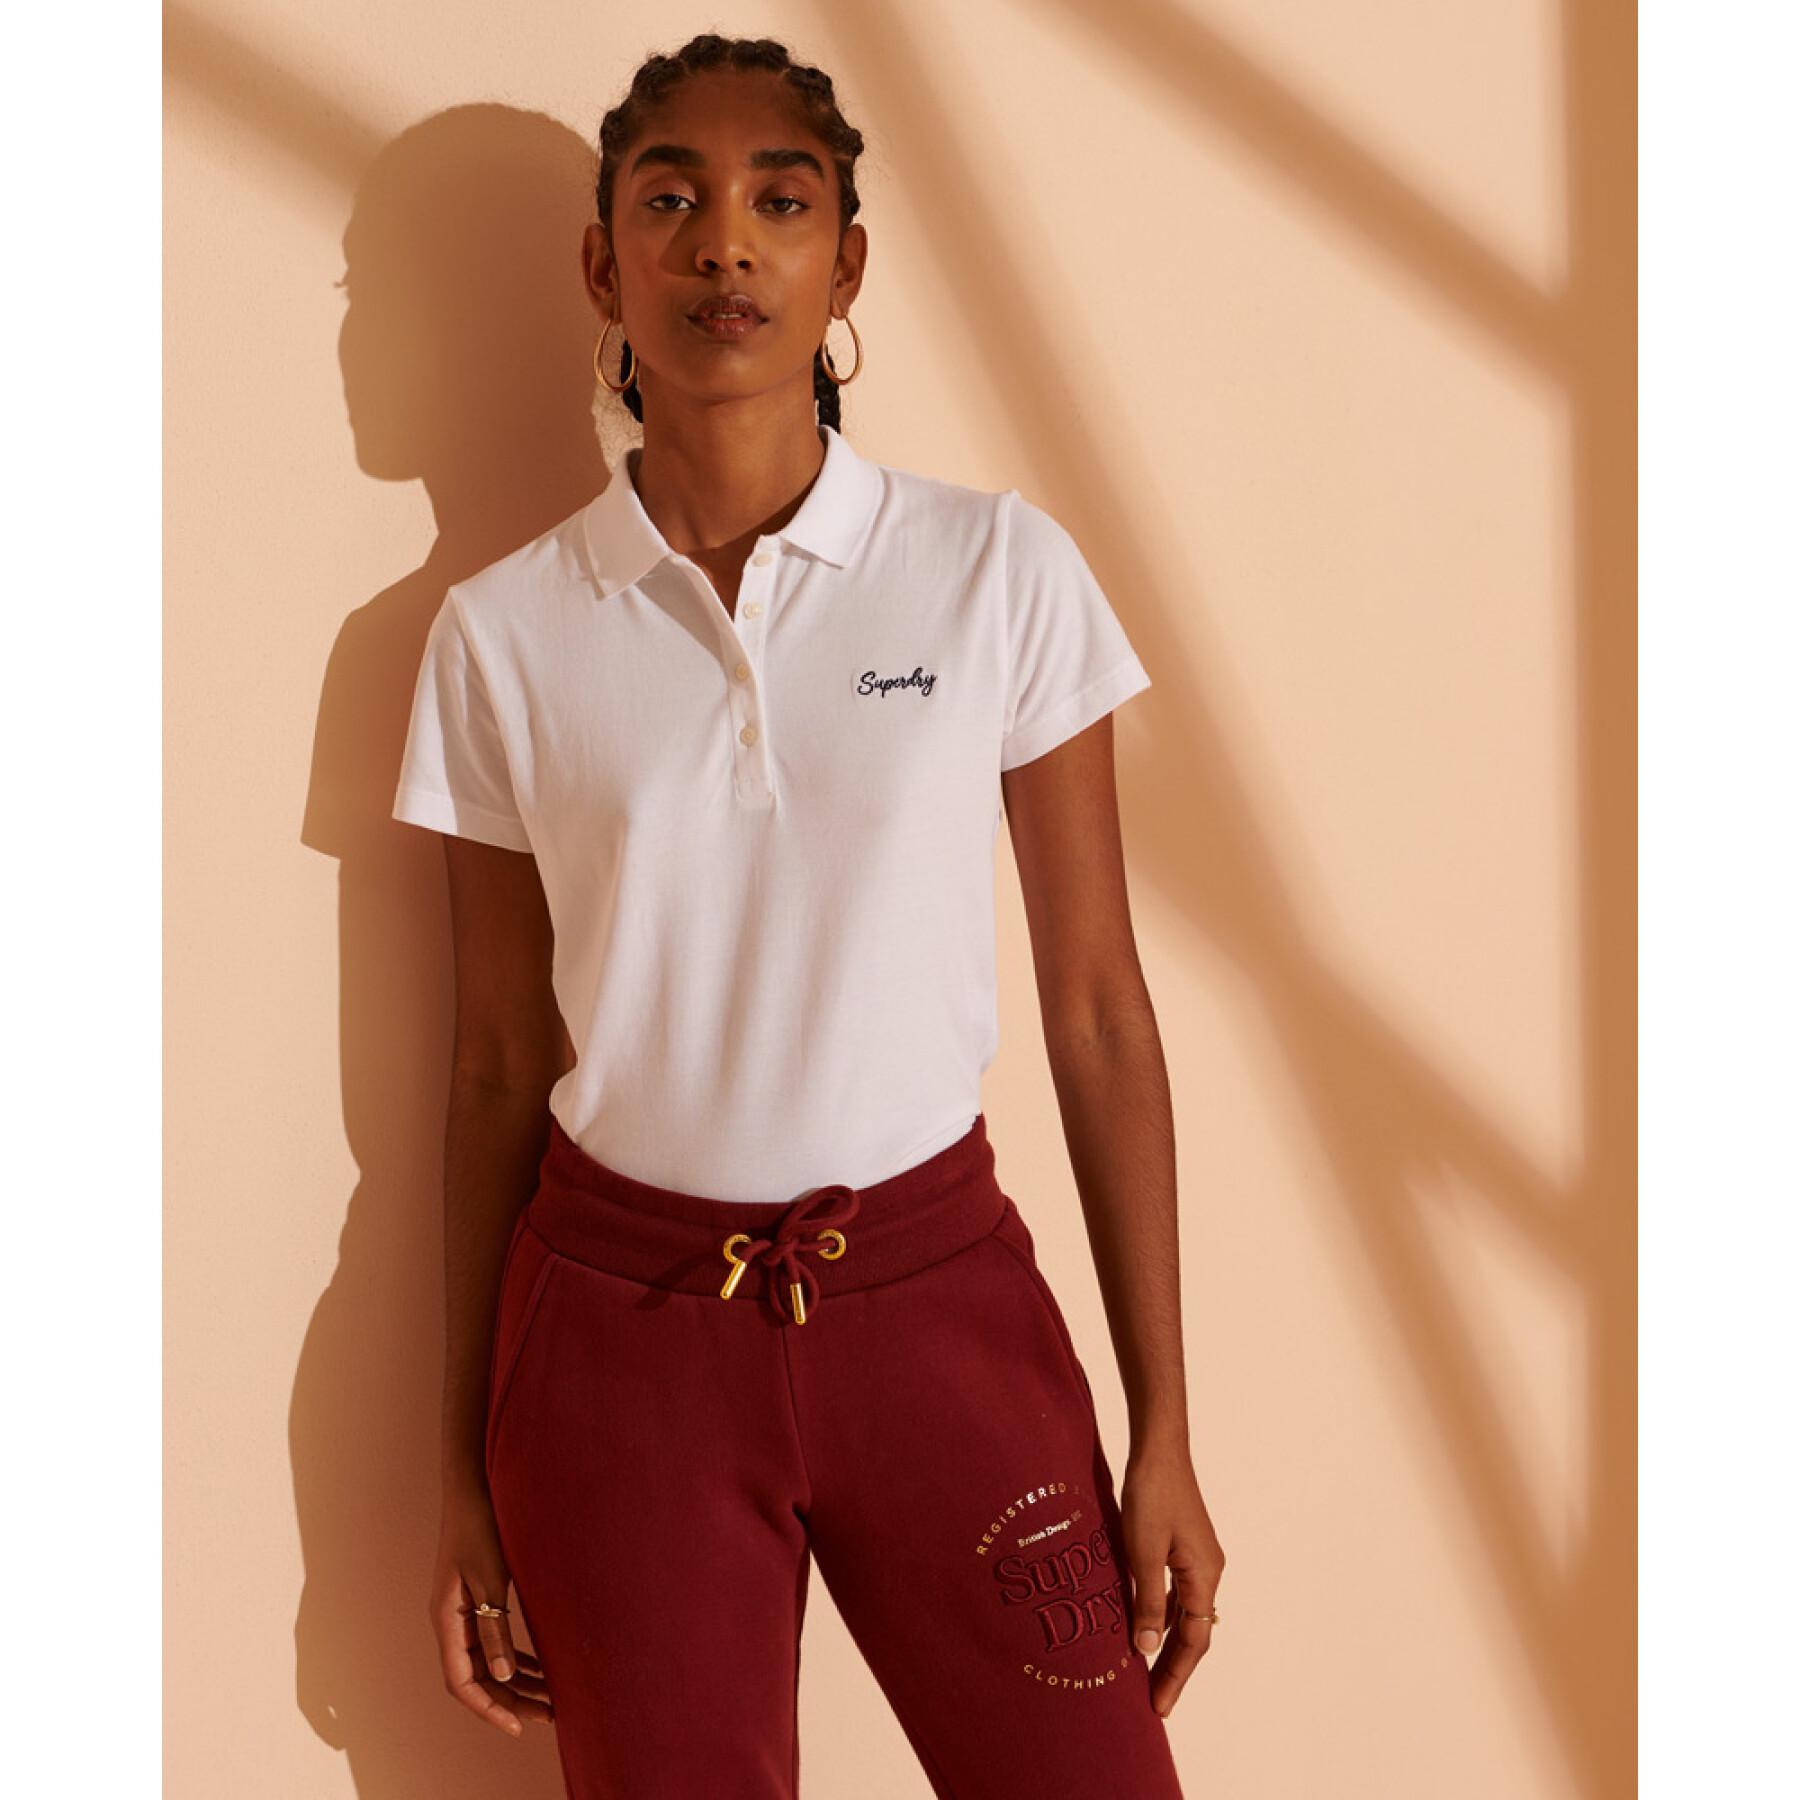 Women's polo shirt Superdry Scripted